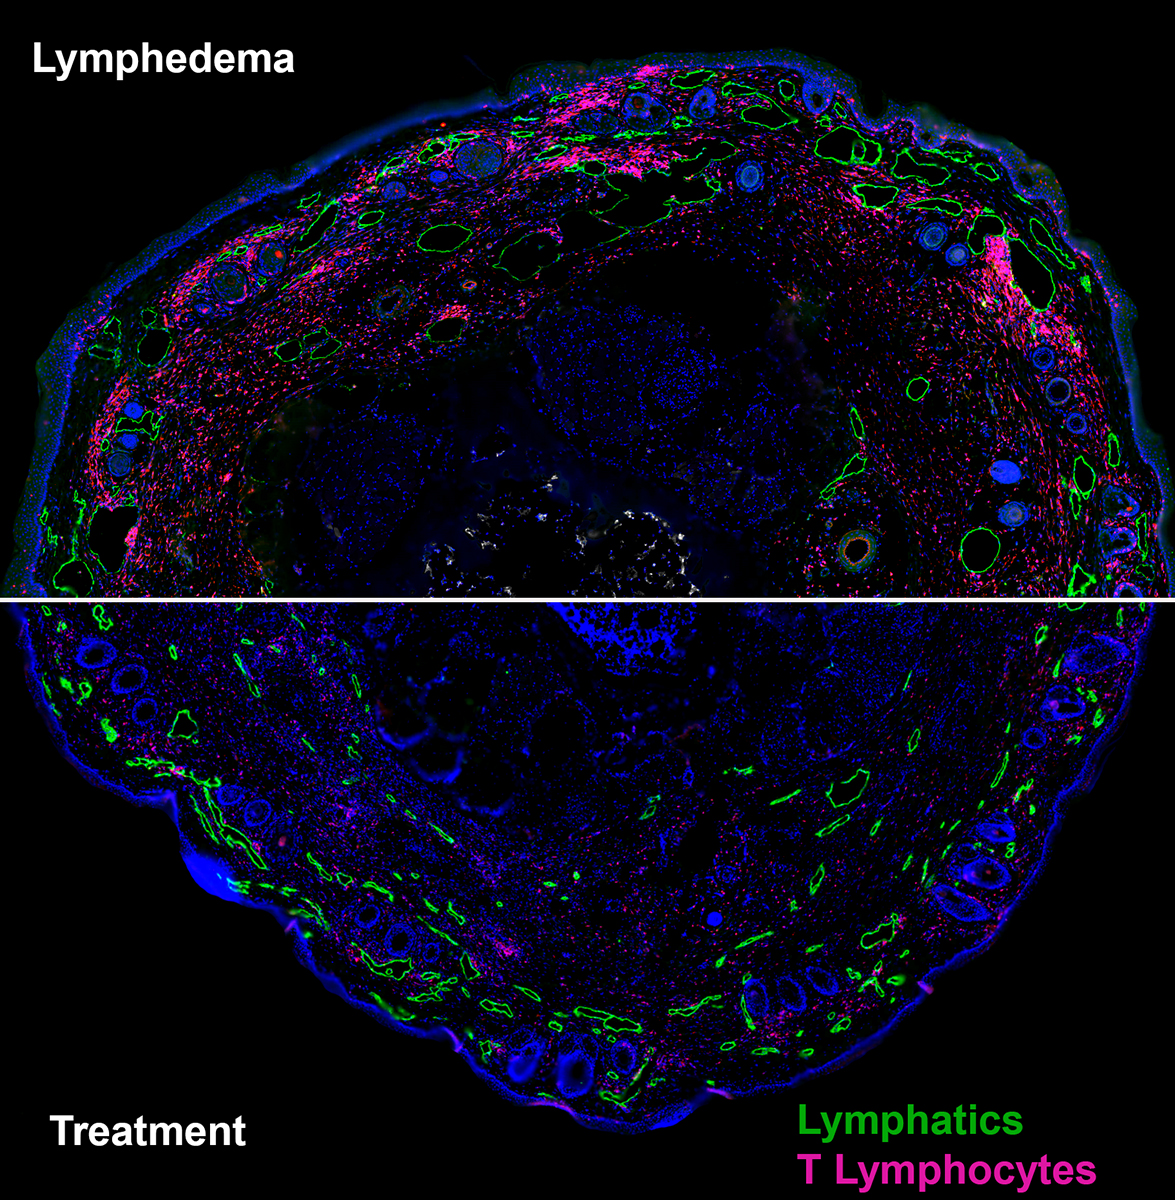 Th2 type T cells in lymphedema pathology